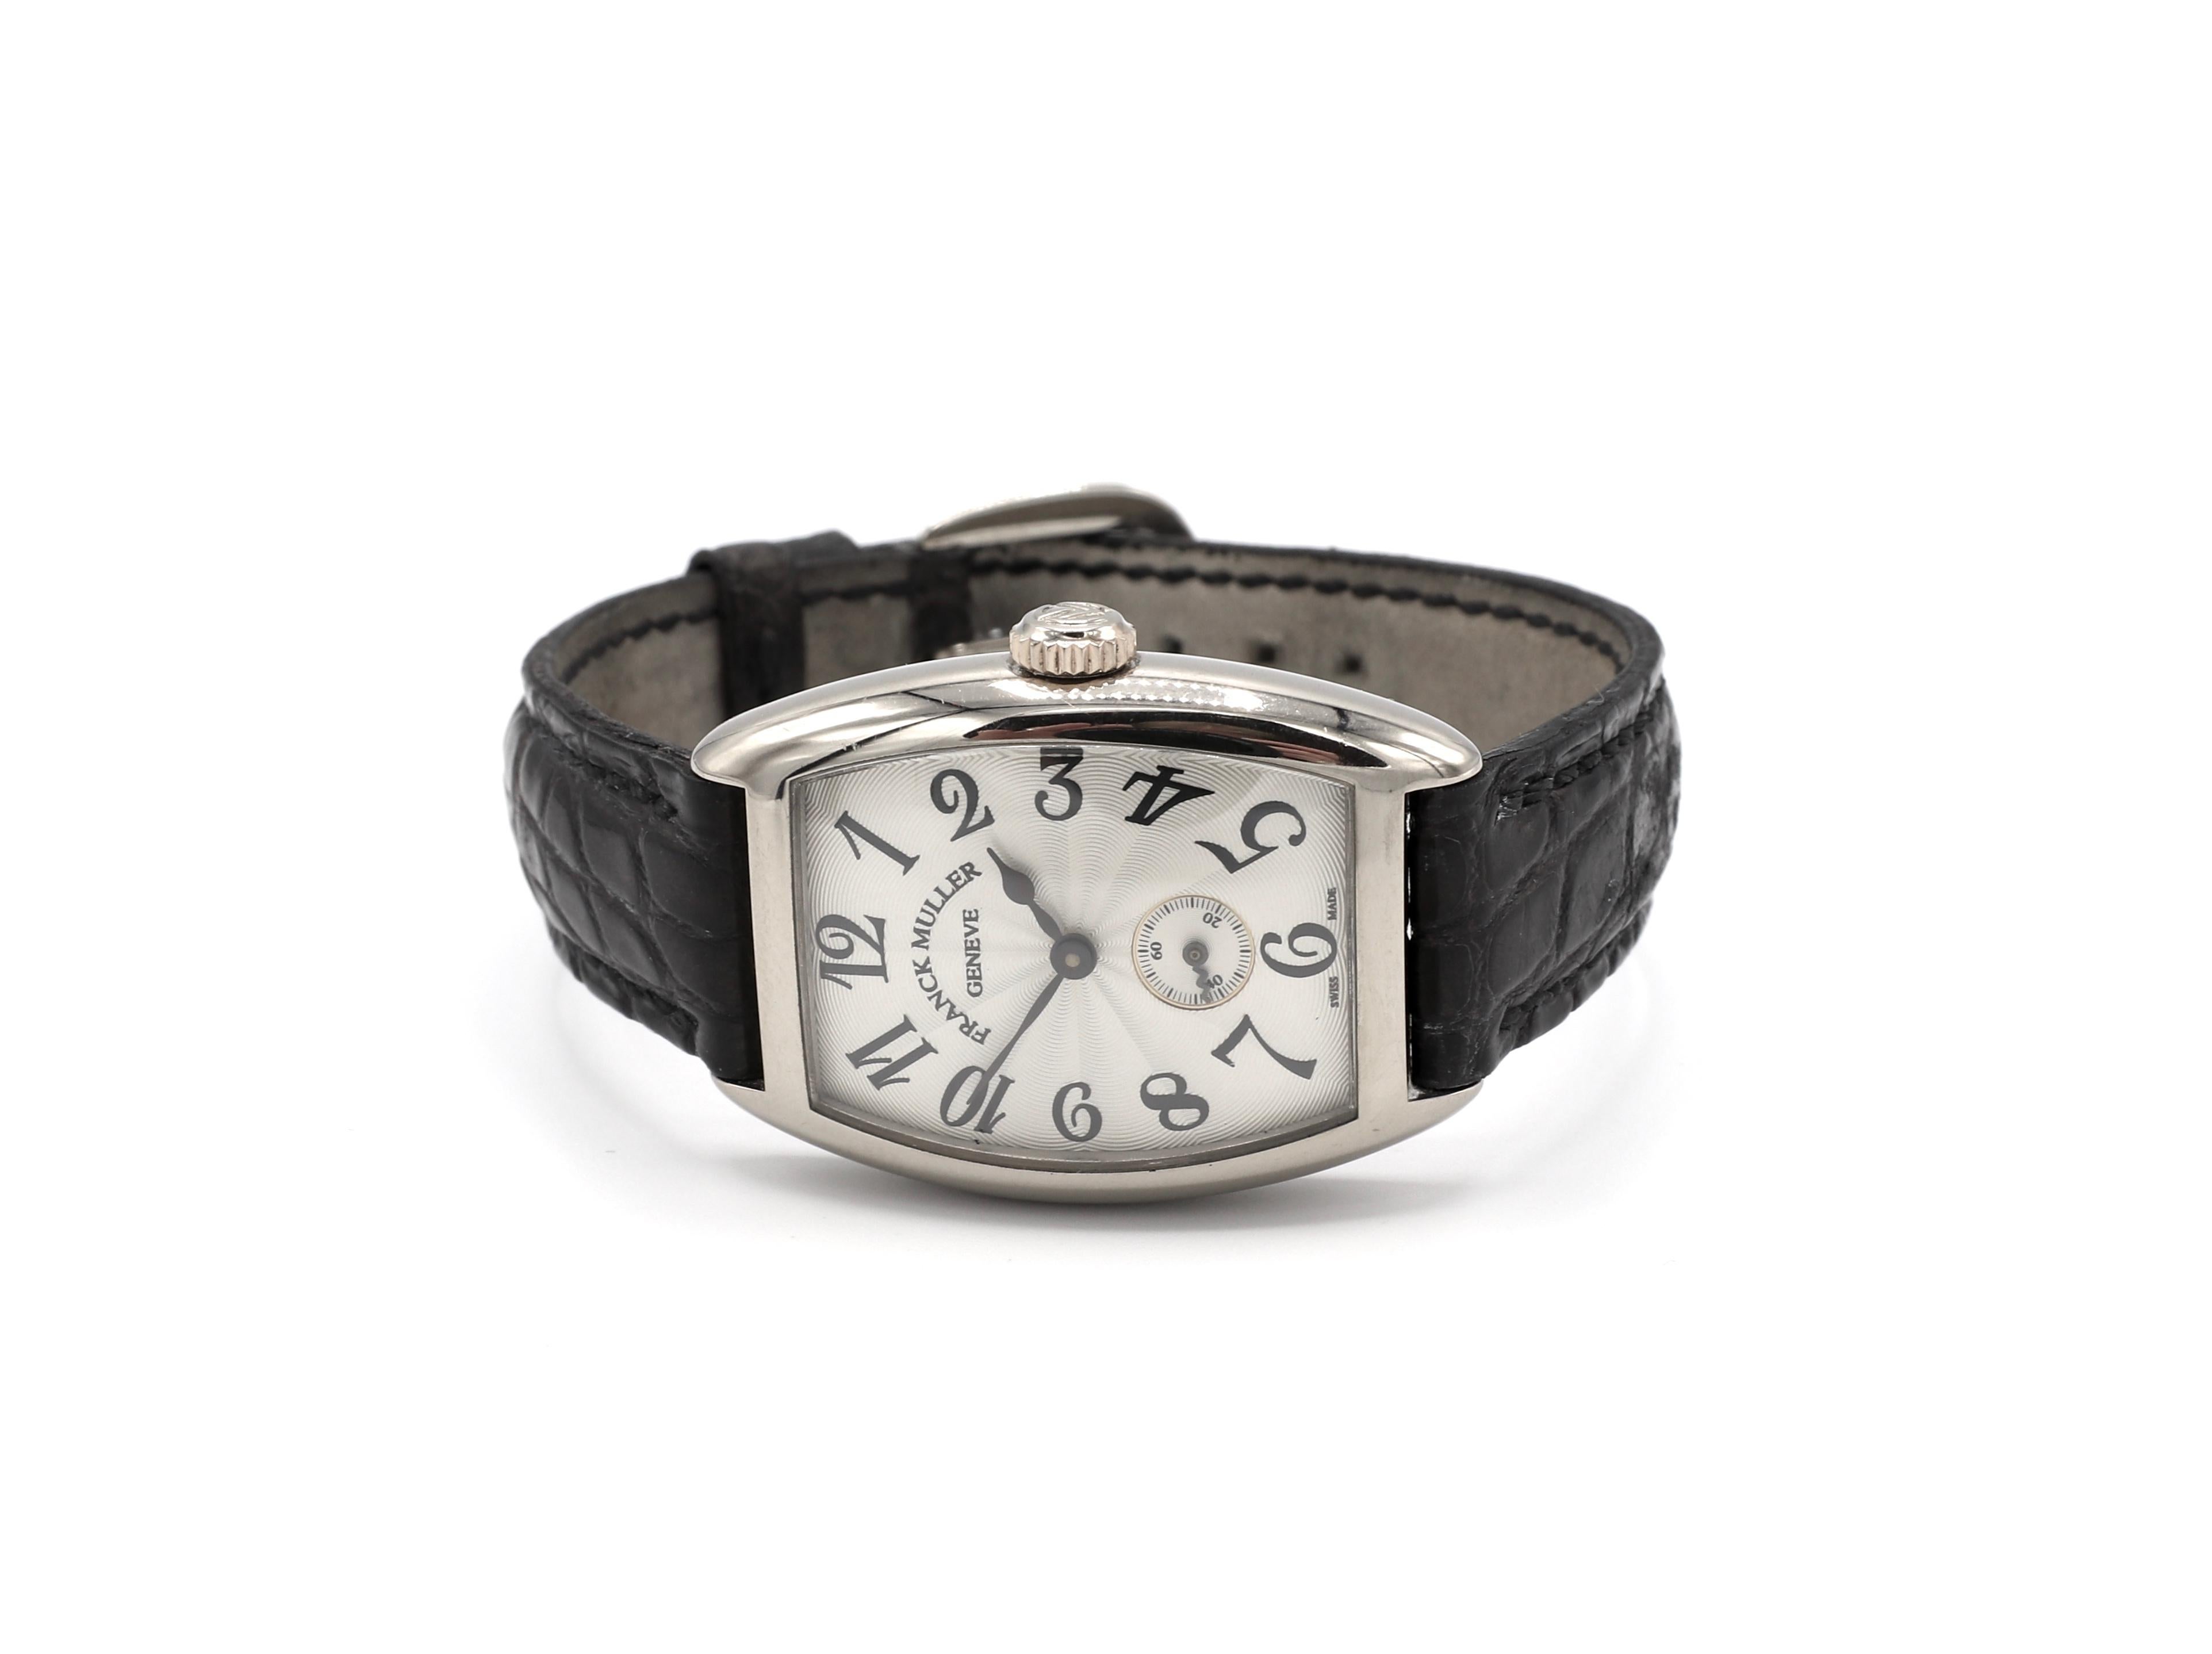 Franck Muller Genève, Cintrée Curvex 18K White Gold 1752 S6 Leather Strap Watch 

Reference: 1756 S6
Metal: 18k white gold
Case: 34mm x 24mm
Dial: Silver
Crystal: Sapphire
Movement: Automatic 
Strap: Black crocodile, slight signs of wear as